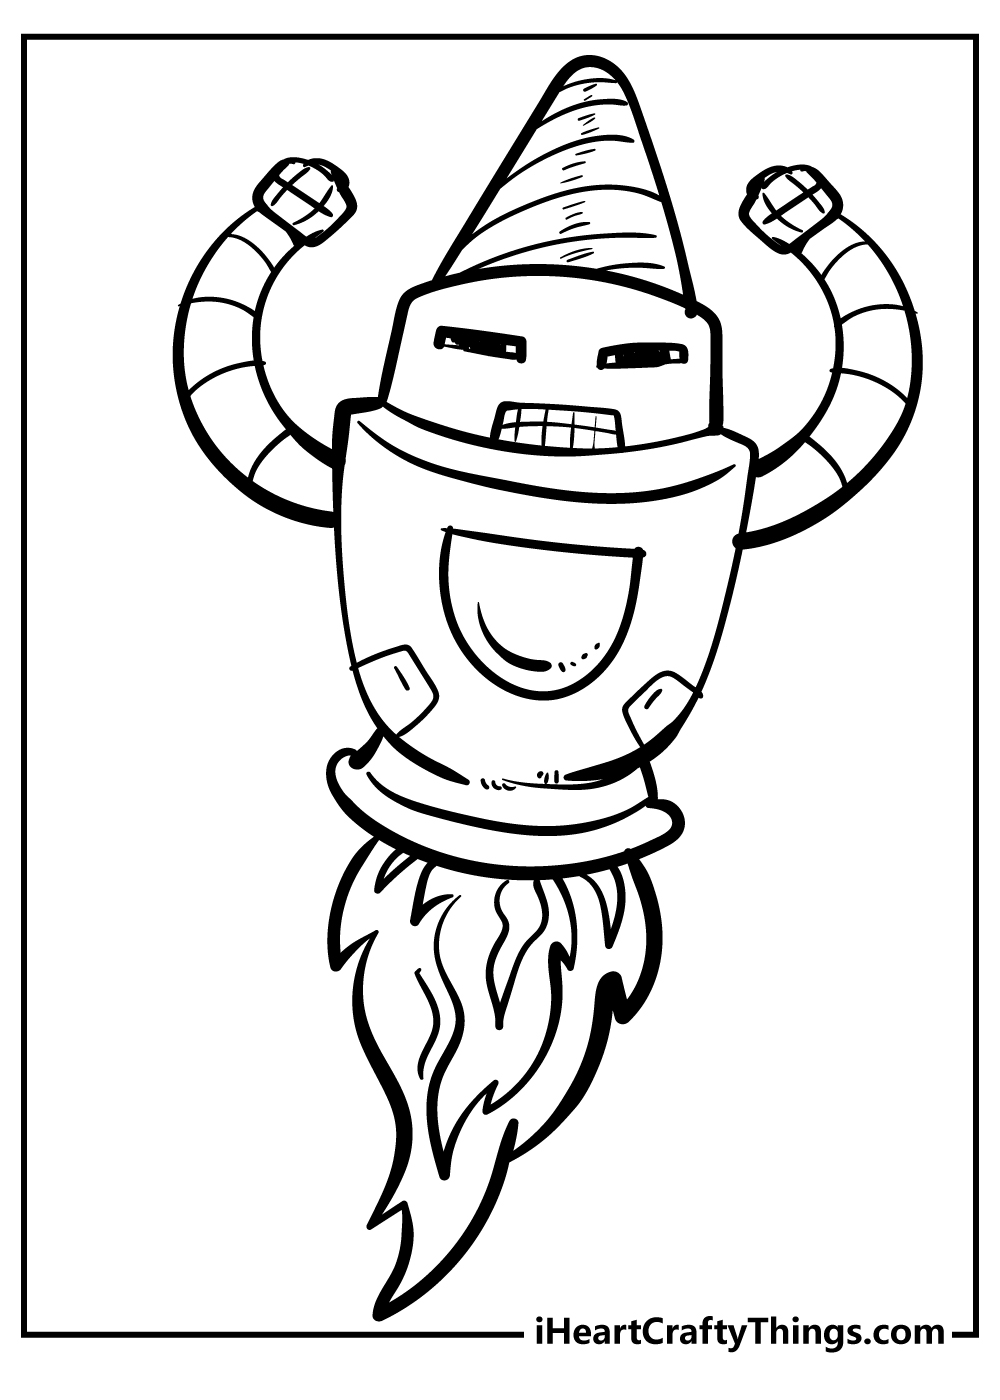 Printable Robot Coloring Pages (Updated 2022)